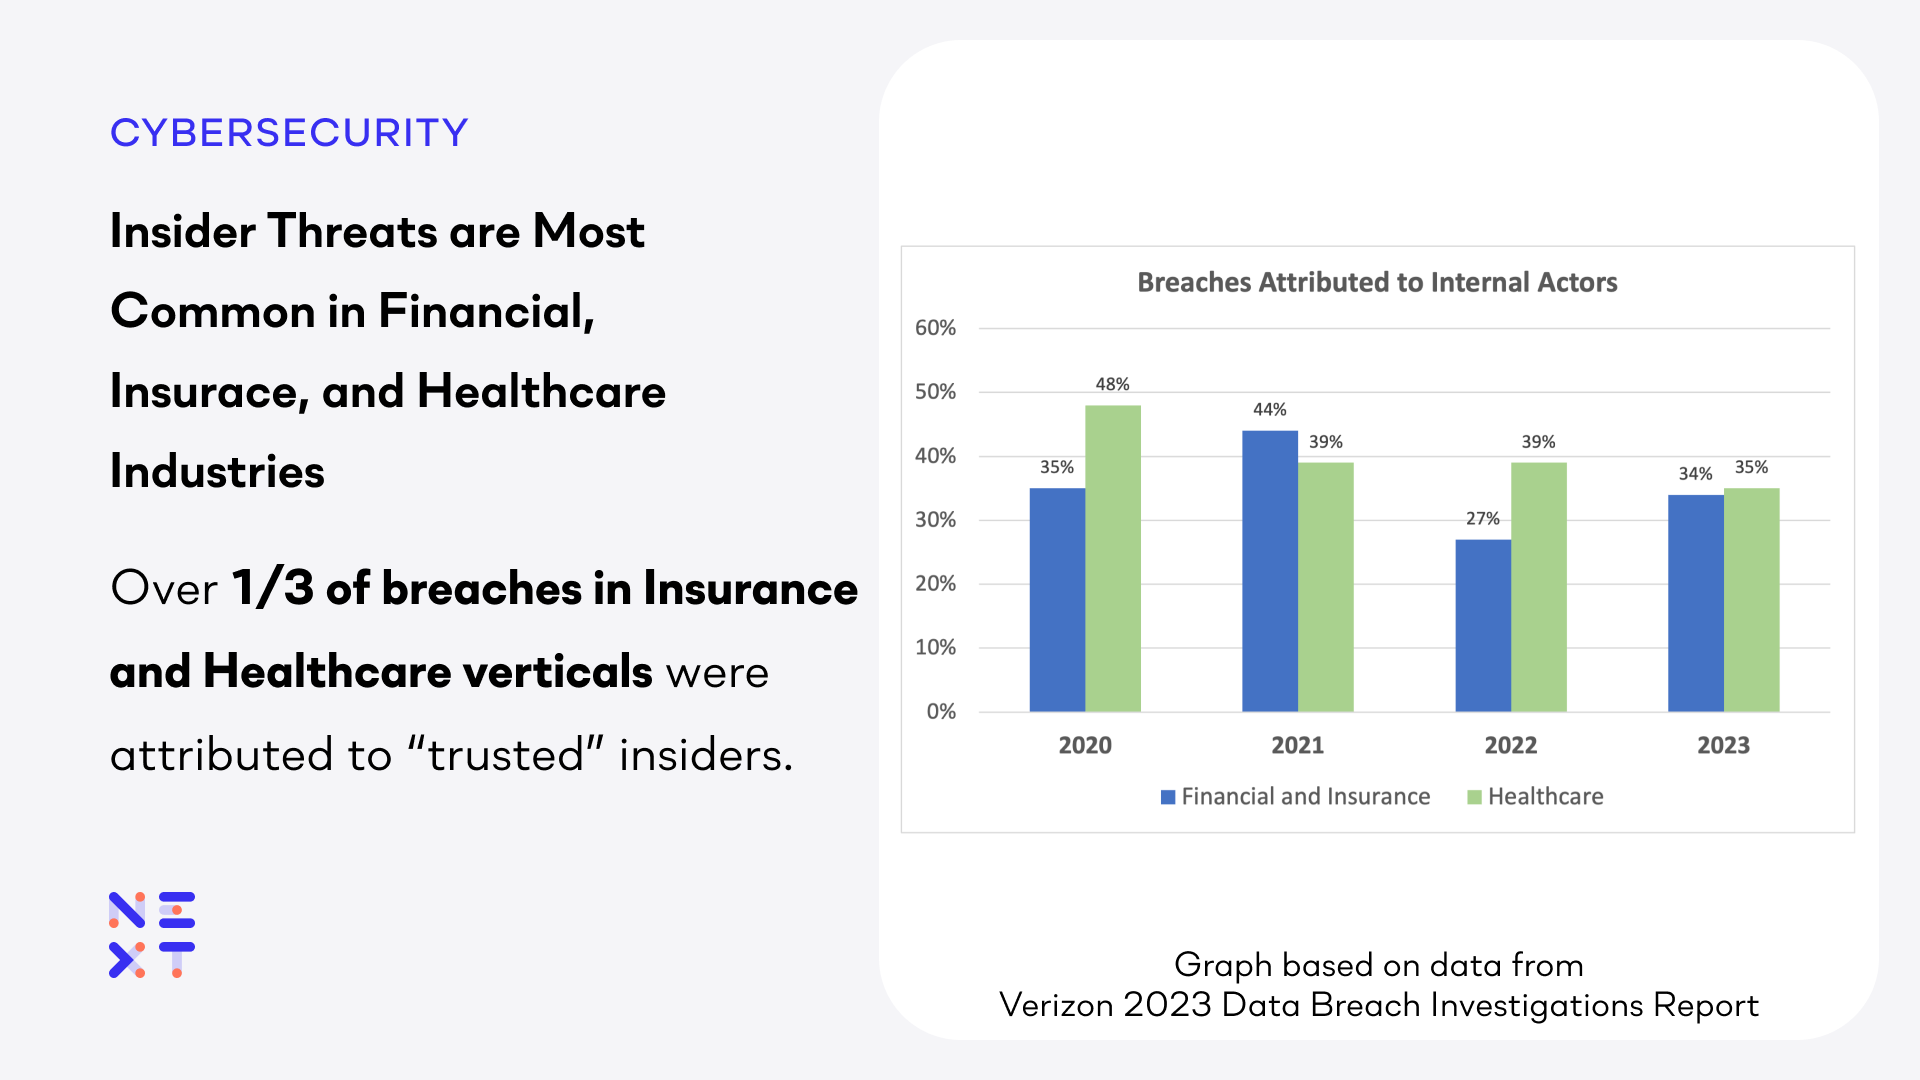 The 2023 Verizon DBIR report says over 1/3 of breaches in Financial, Insurance and Healthcare verticals were attributed to trusted insiders.